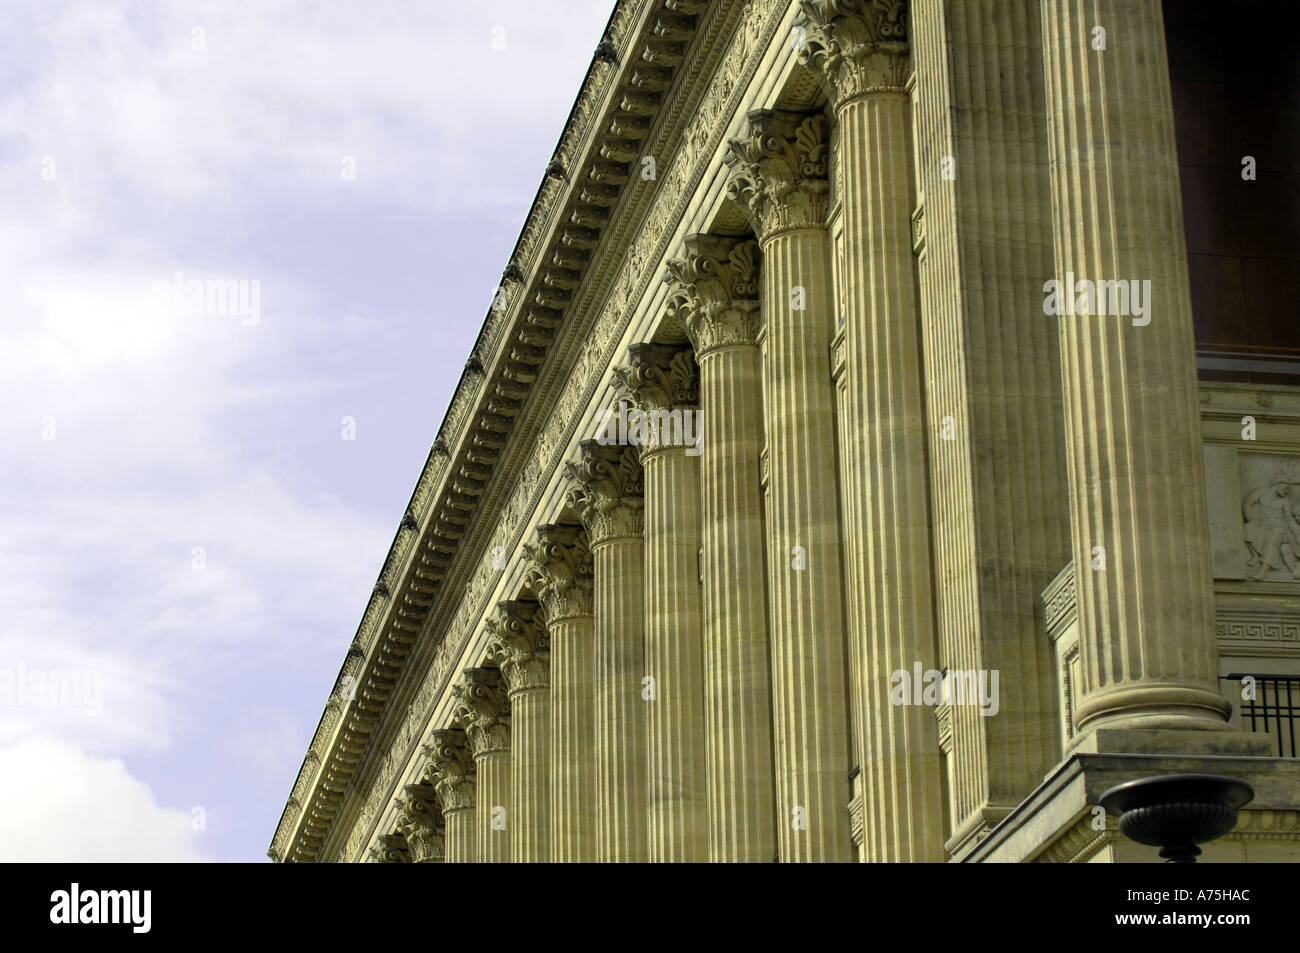 Old National Gallery Berlin Germany  Stock Photo